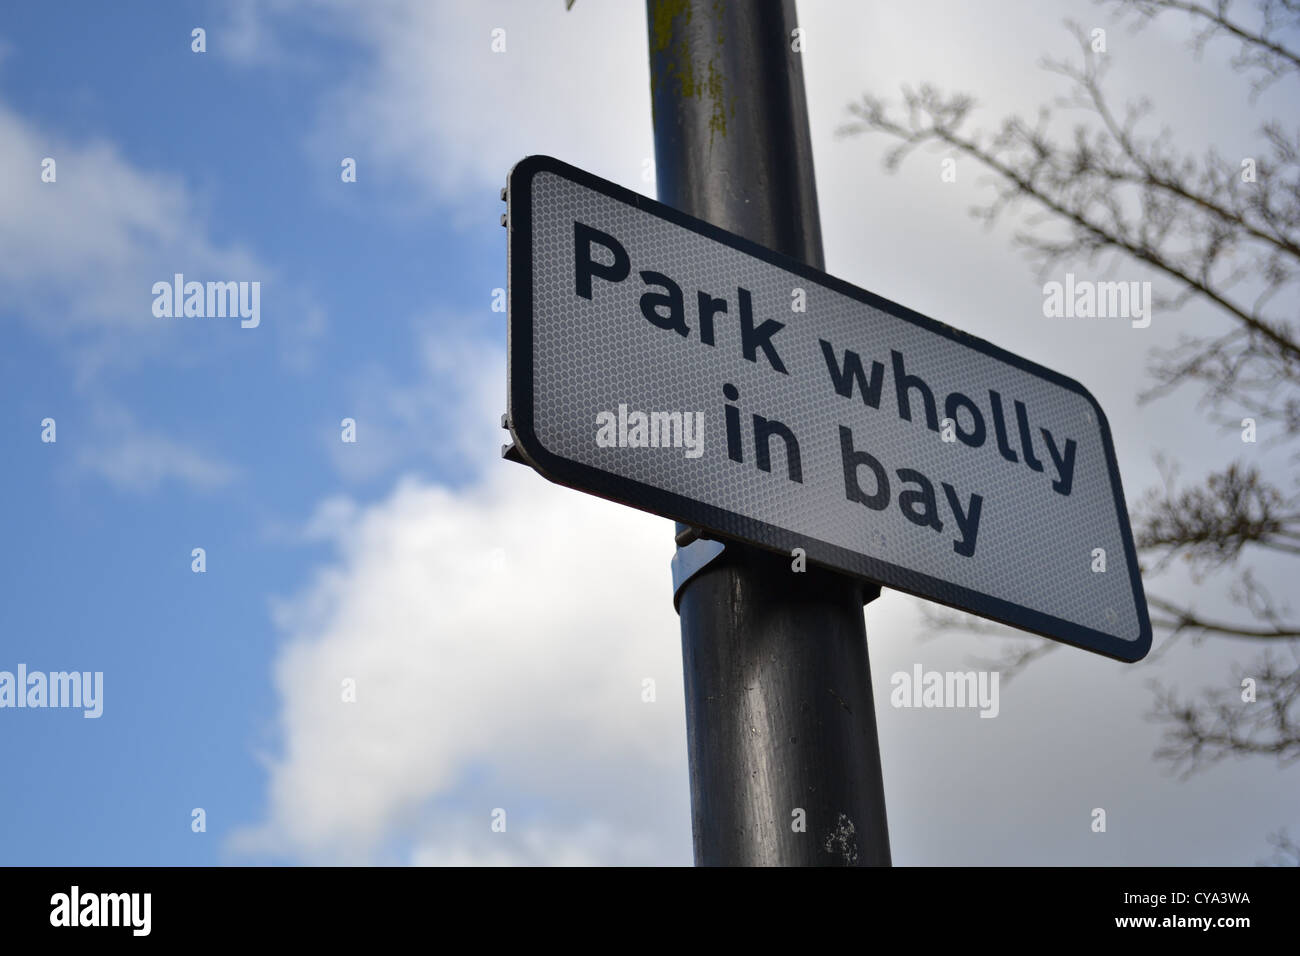 Park wholly in bay sign Stock Photo